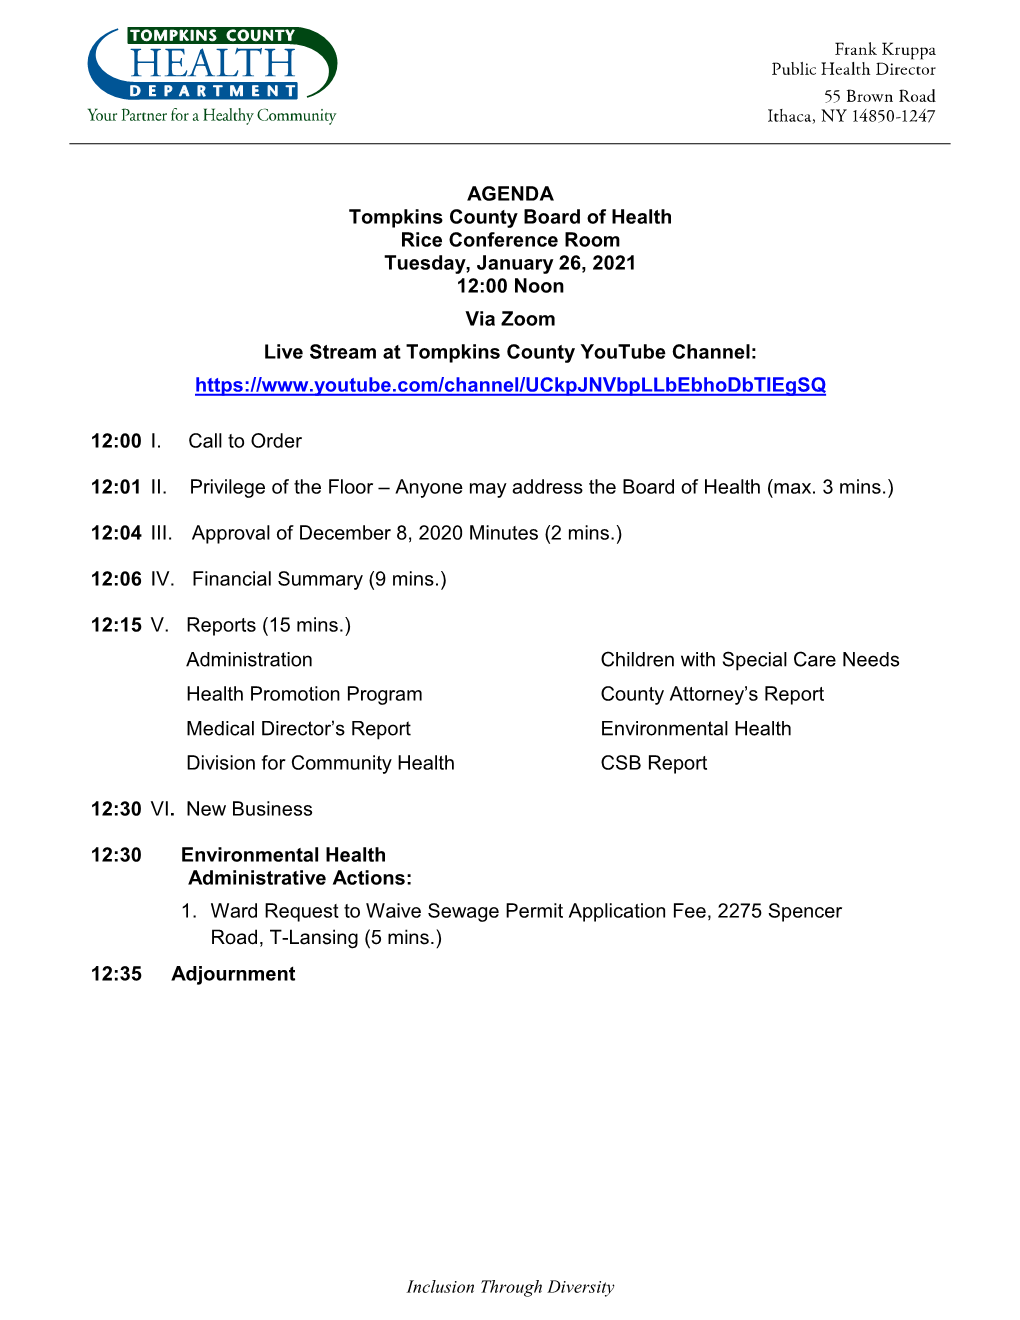 AGENDA Tompkins County Board of Health Rice Conference Room